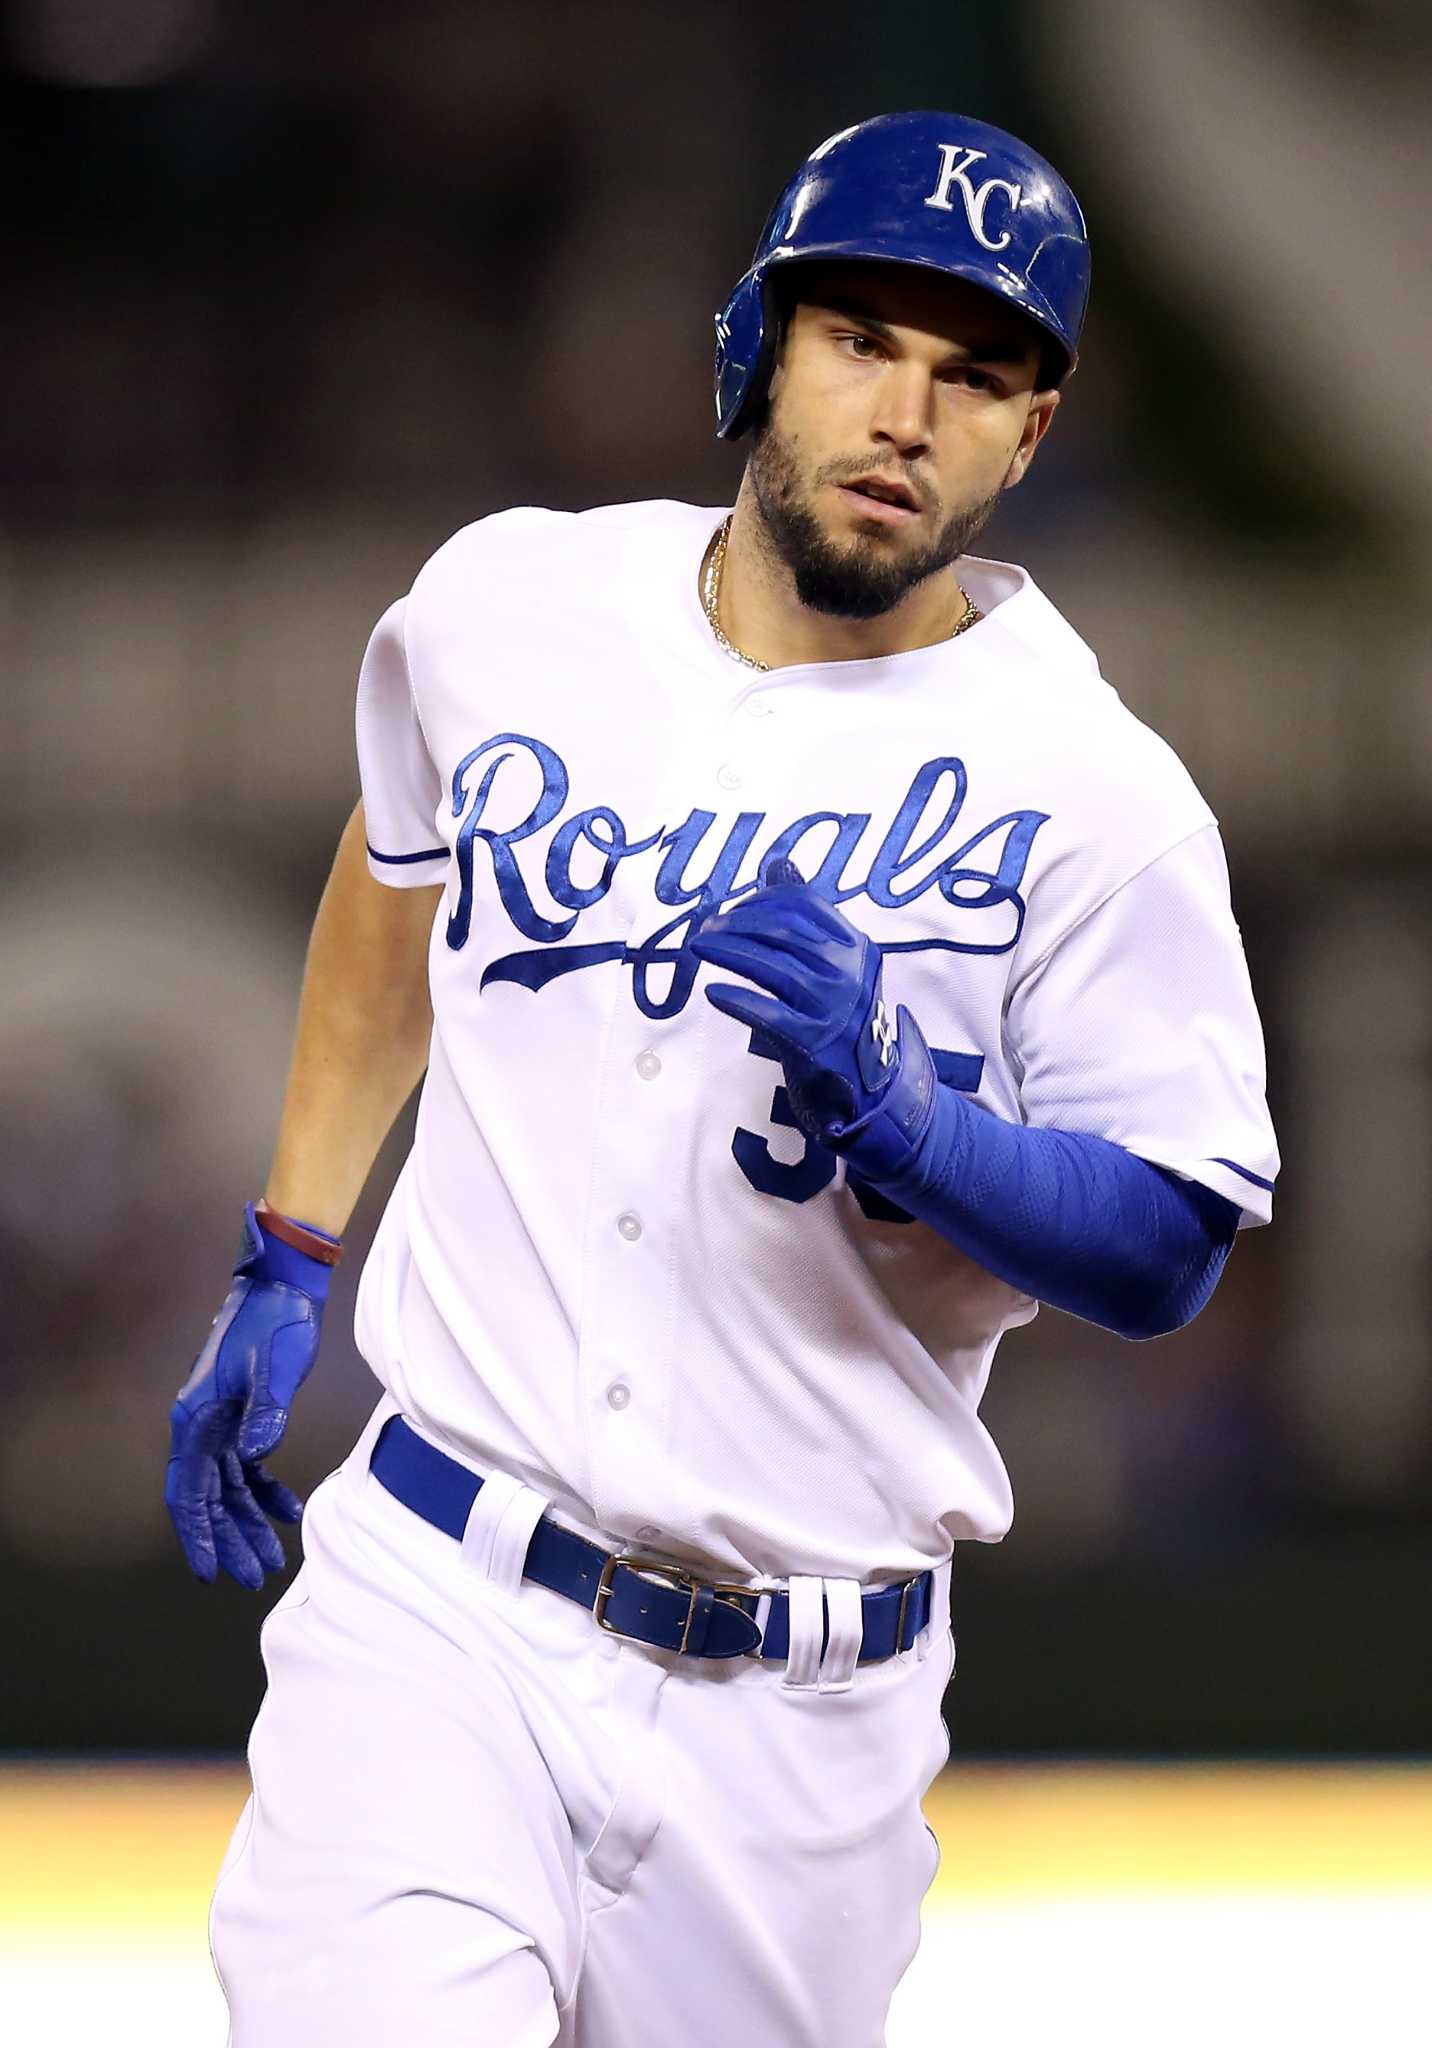 Are the Royals really going to land Hosmer and Moustakas? - Royals